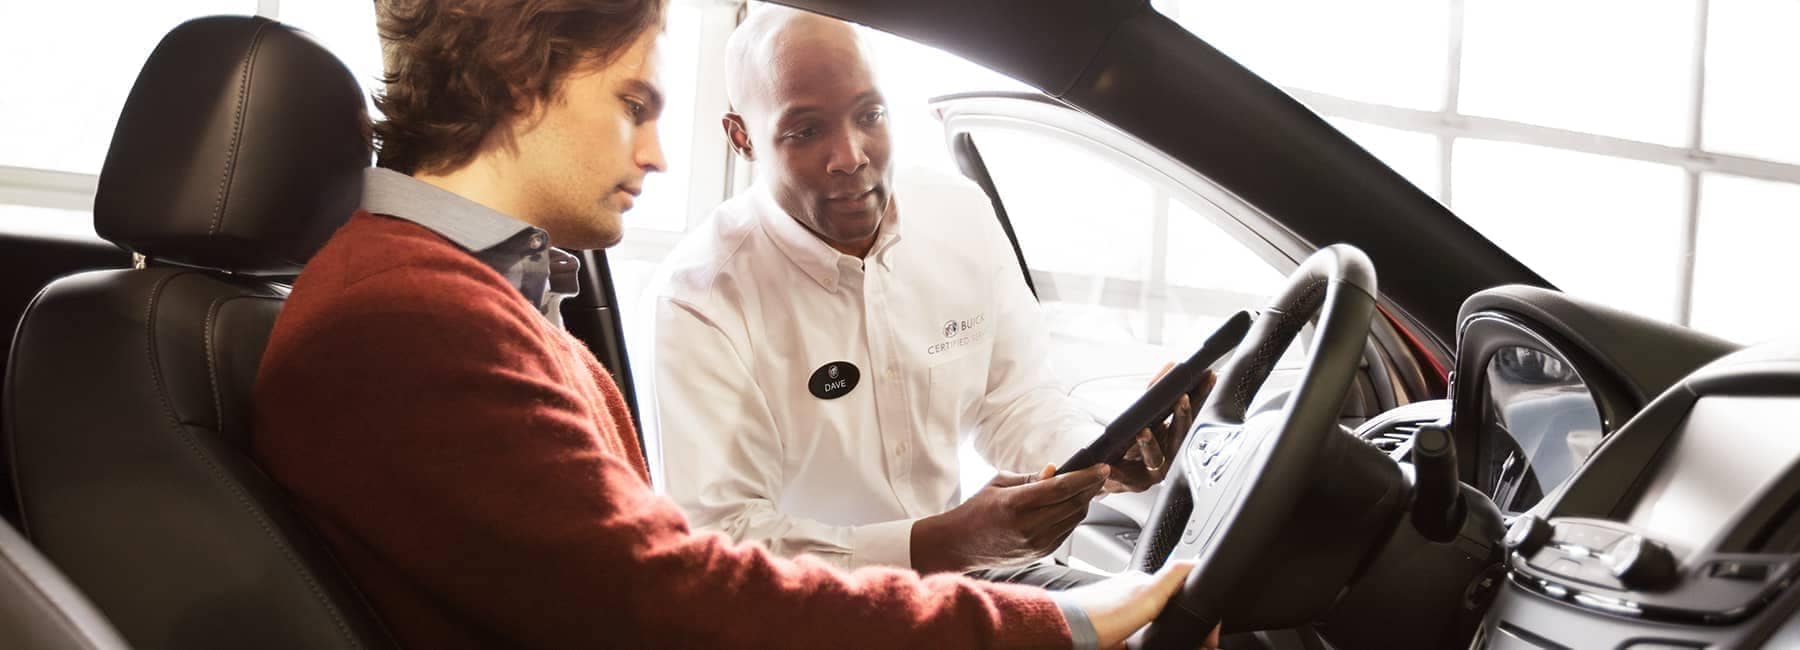 Buick Service technician advises new owner